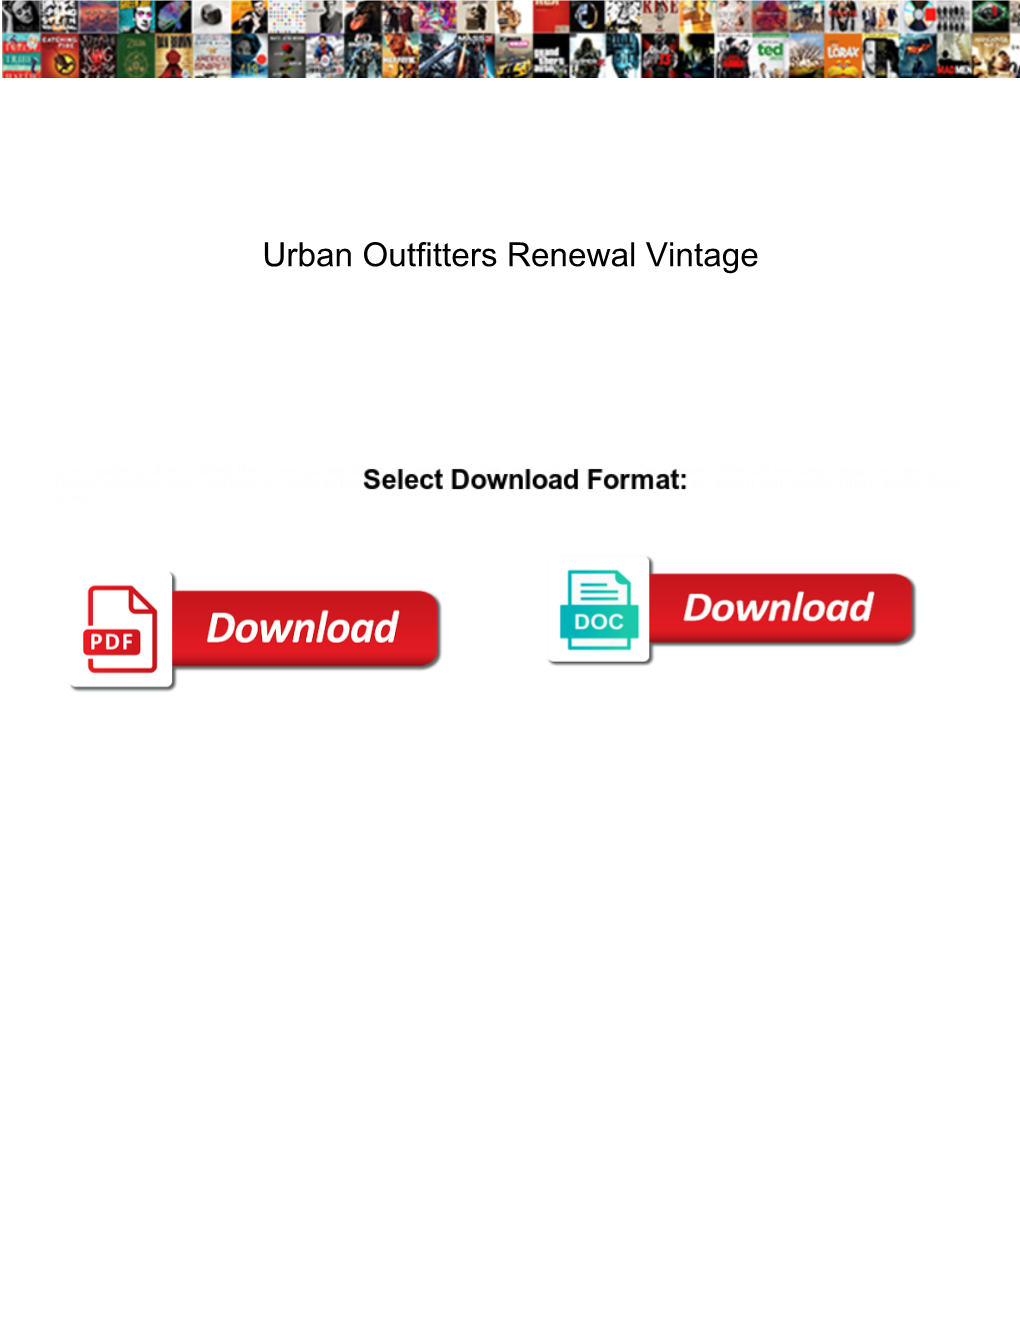 Urban Outfitters Renewal Vintage